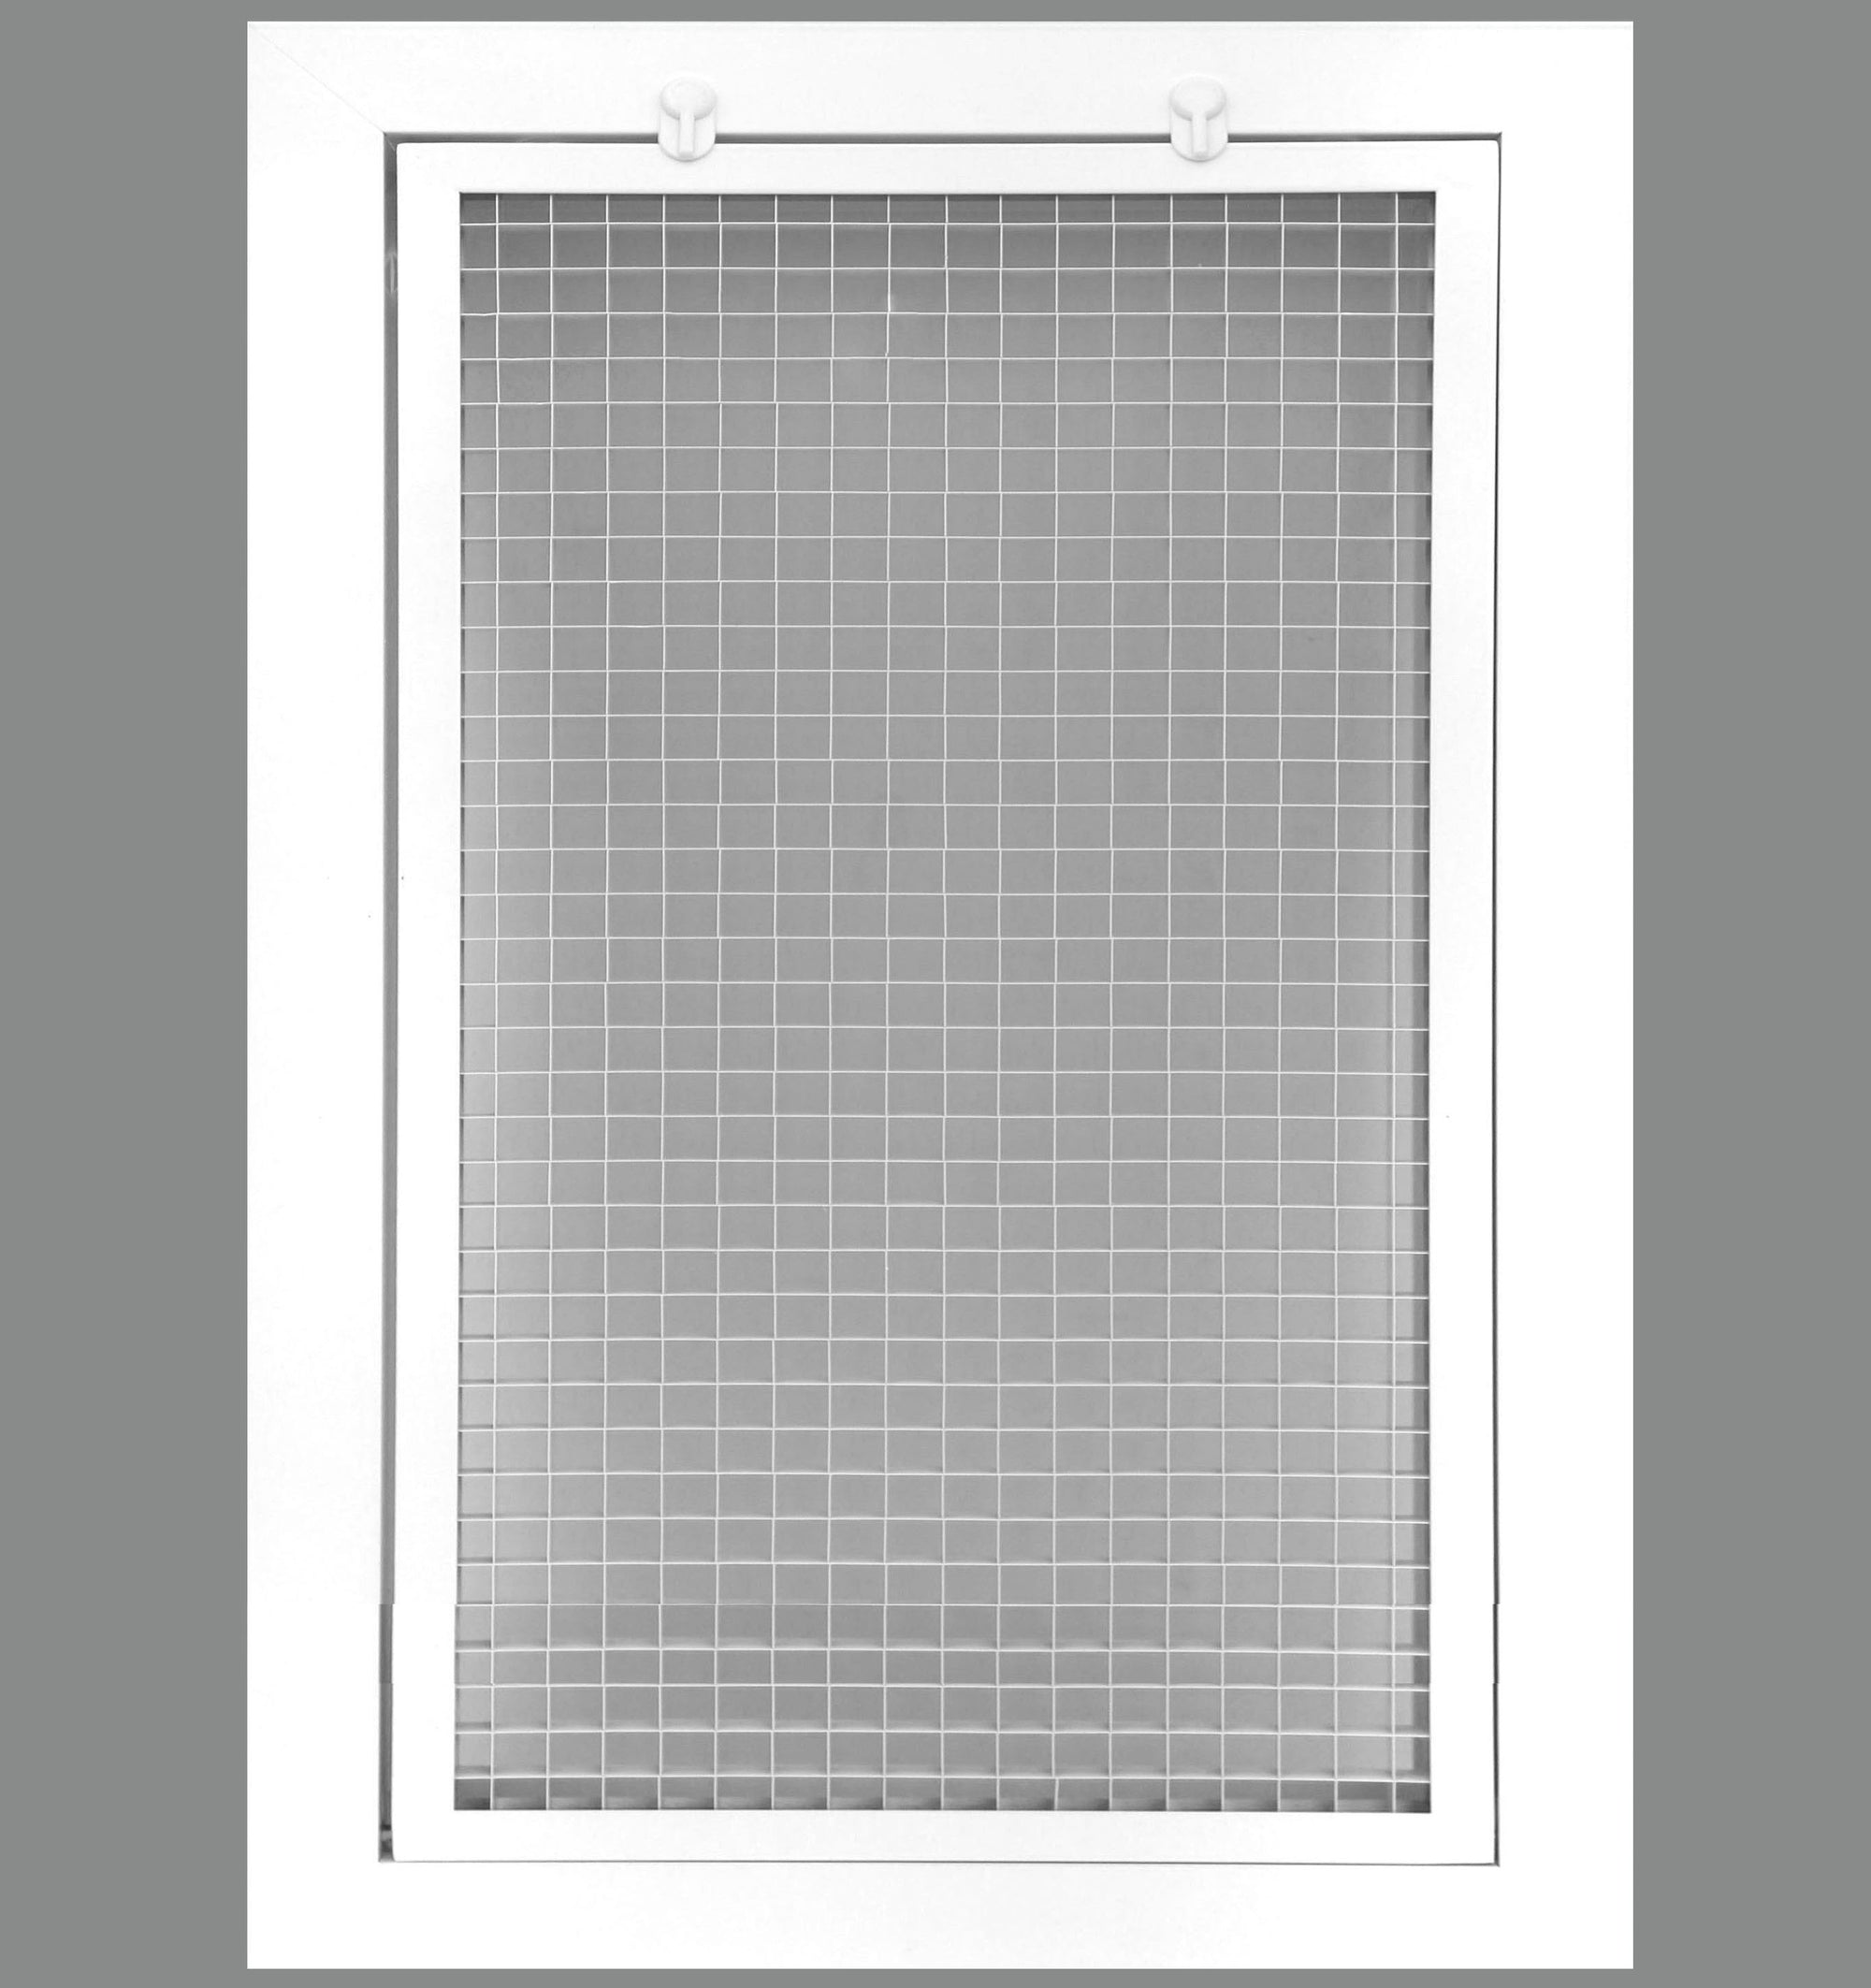 10" x 14" Cube Core Eggcrate Return Air Filter Grille for 1" Filter